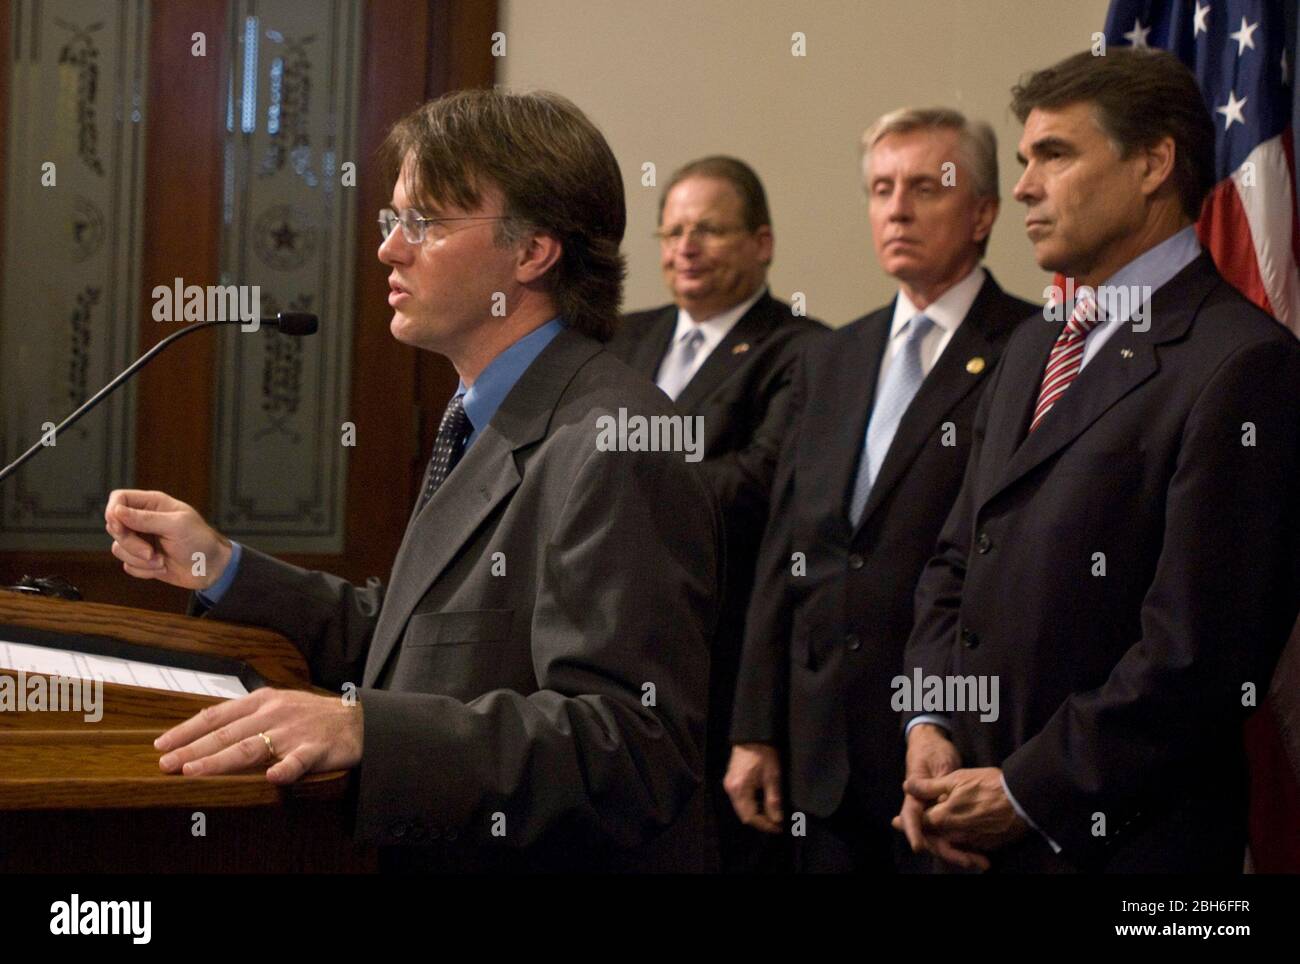 Austin, Texas USA, April 29th, 2009: Dr. David Lakey, Commissioner of the Texas Department of State Health Services, speaks at a press conference o discuss the state's efforts in response to the swine flu. Gov. Rick Perry stands behind Lakey and state education commissioner Robert Scott stands on the right. ©Marjorie Kamys Cotera/Daemmrich Photography Stock Photo